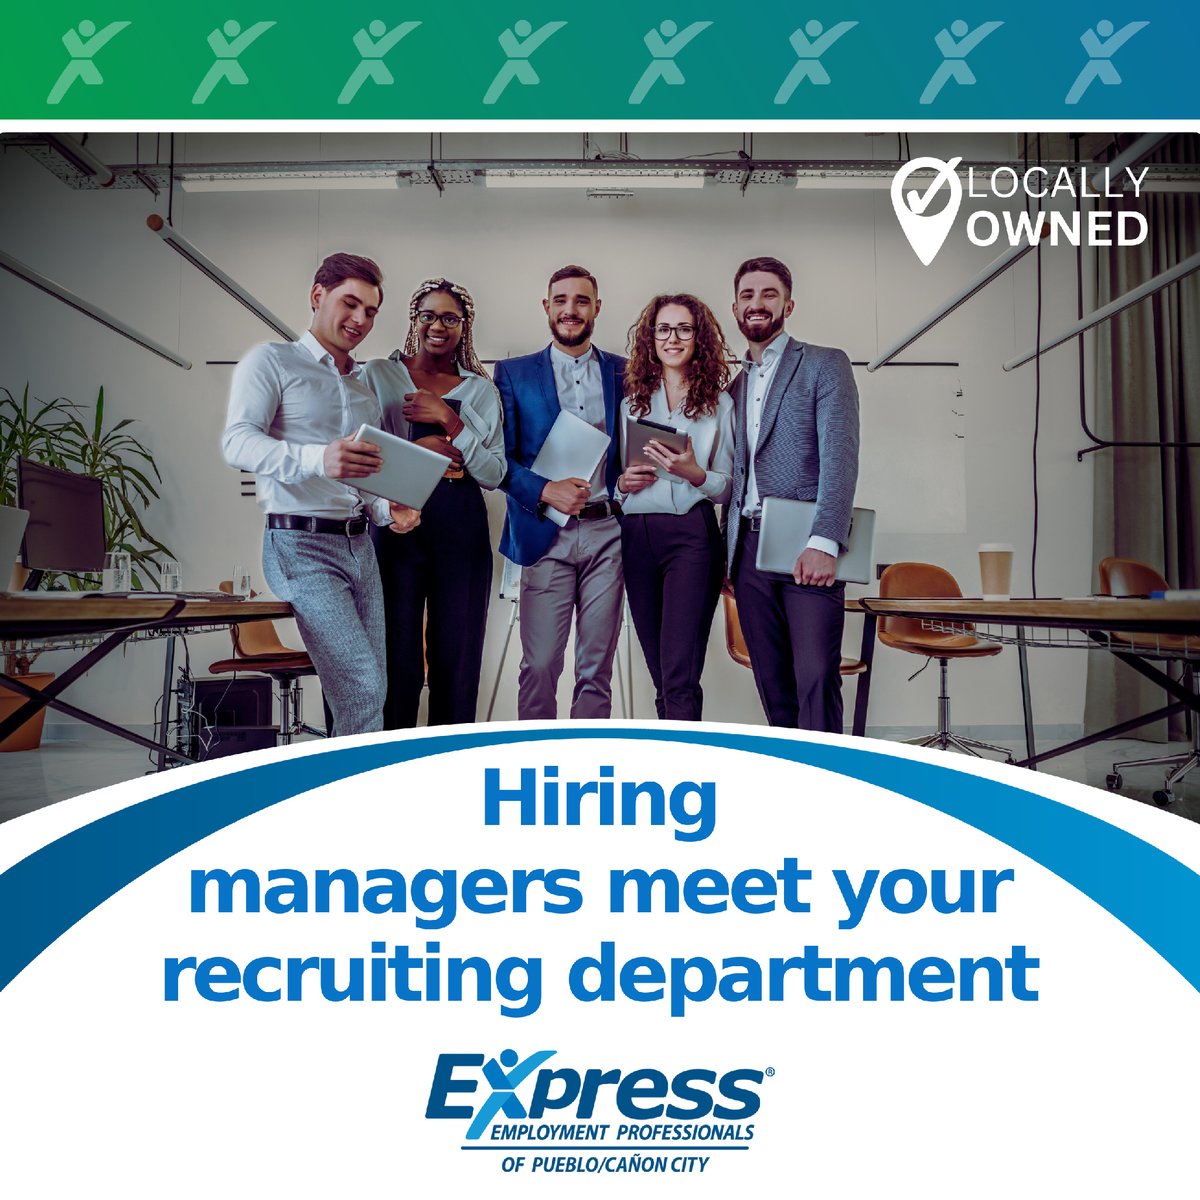 #Employer Update: We aid employers of all sizes with their recruiting efforts
(719)545-9120

#ExpressPros #ColoradoBusiness #BusinessConsultant